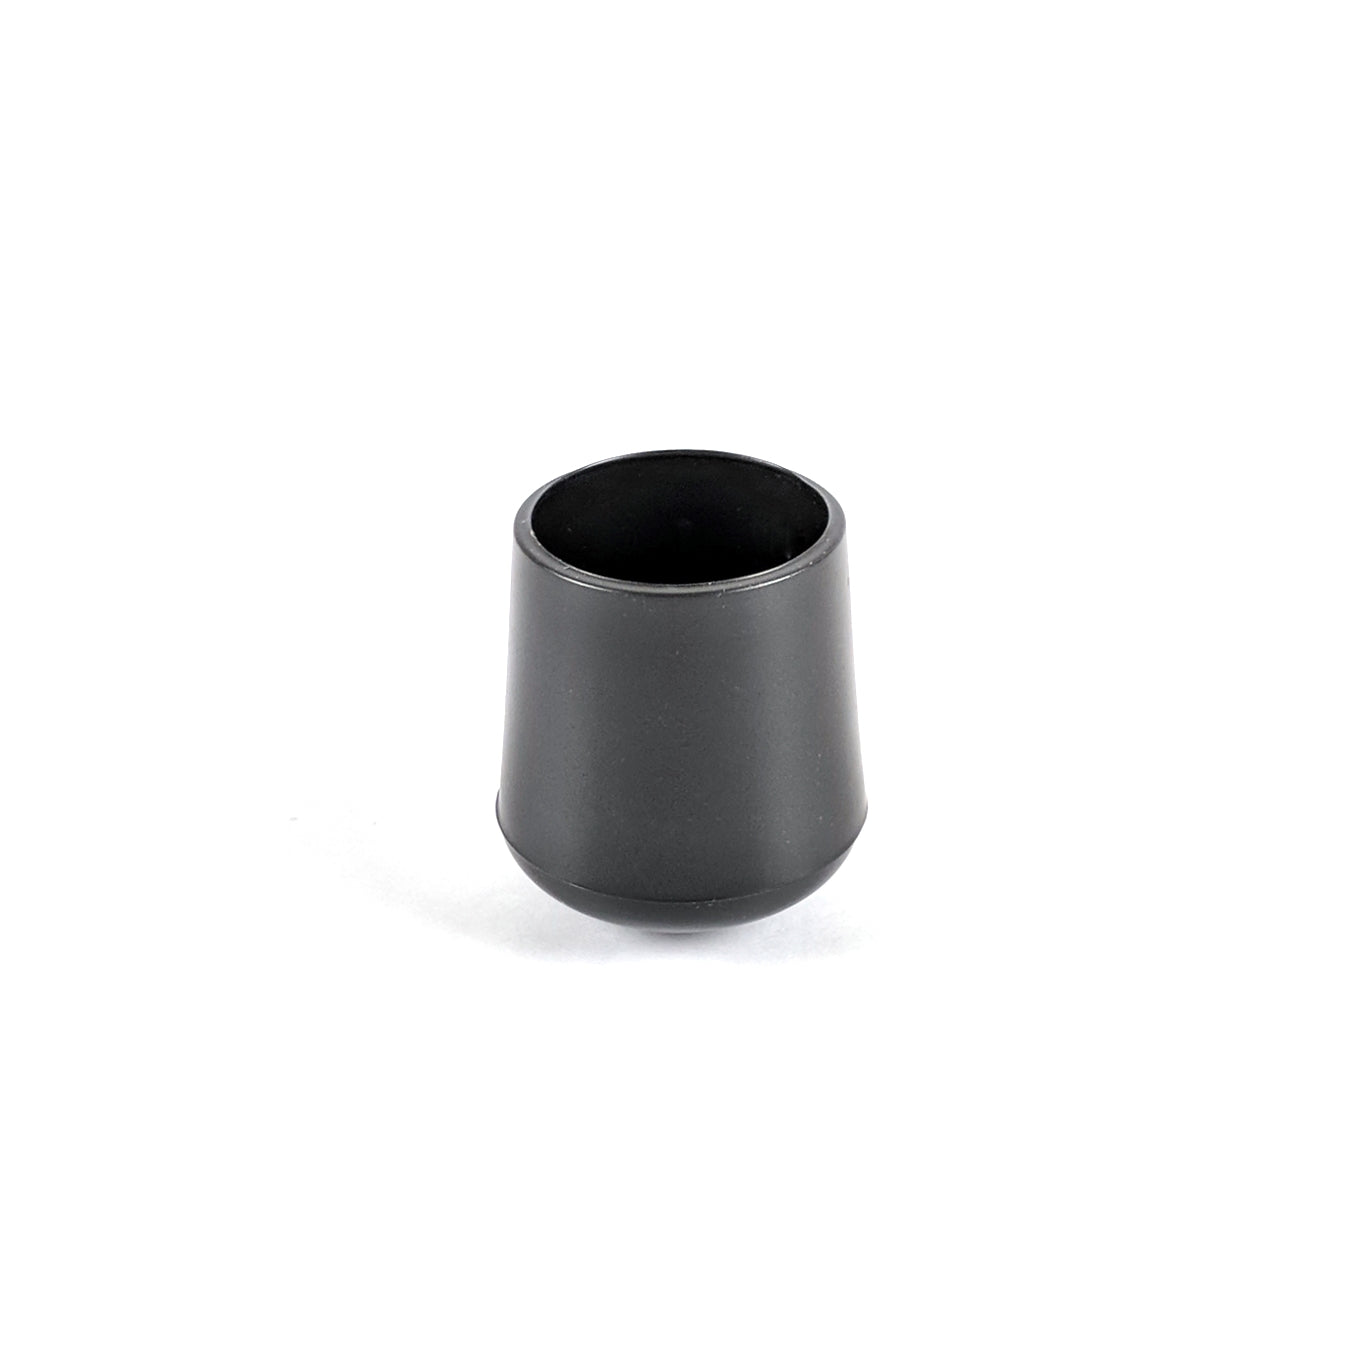 26mm Black Rubber Ferrules with Steel Base Insert - Made in Germany - Keay Vital Parts